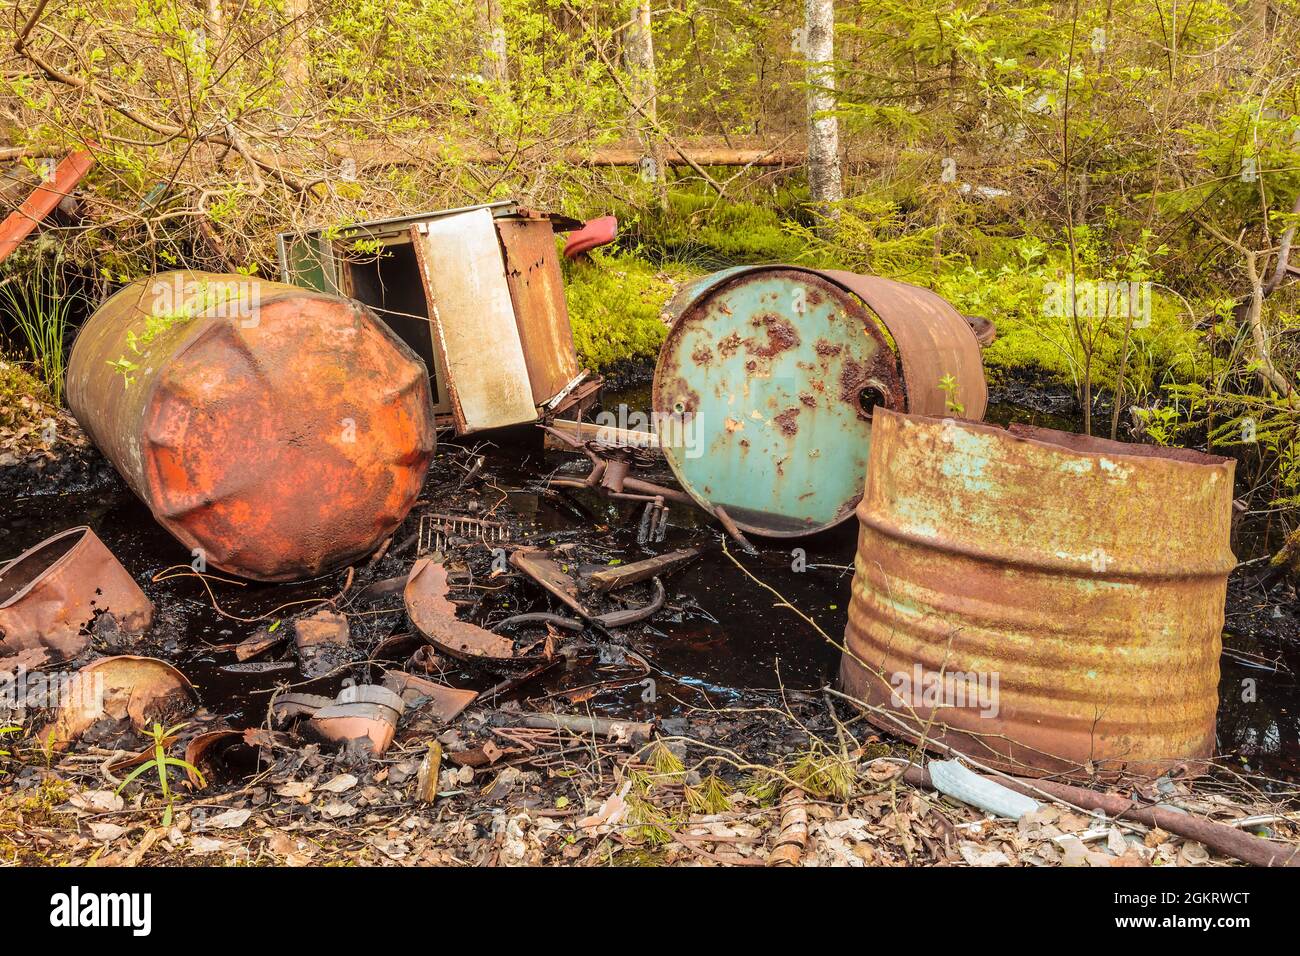 Toxic waste barrels left behind in a forest Stock Photo